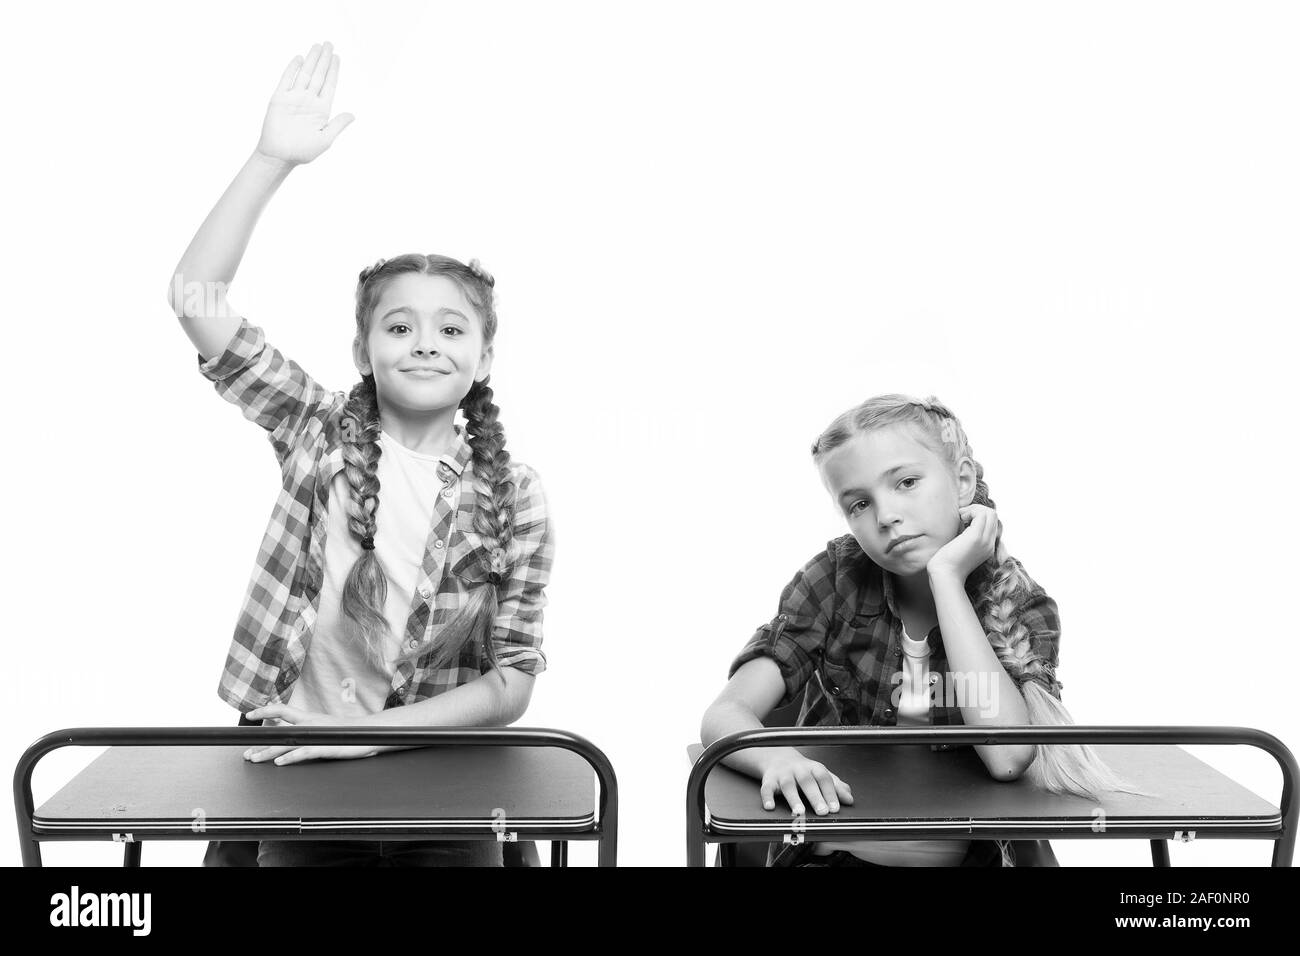 Back to their schooling. Adorable kids with raised hands sitting at desks isolated on white. Small schoolgirls having compulsory schooling. Little children enjoy home schooling. Schooling years. Stock Photo